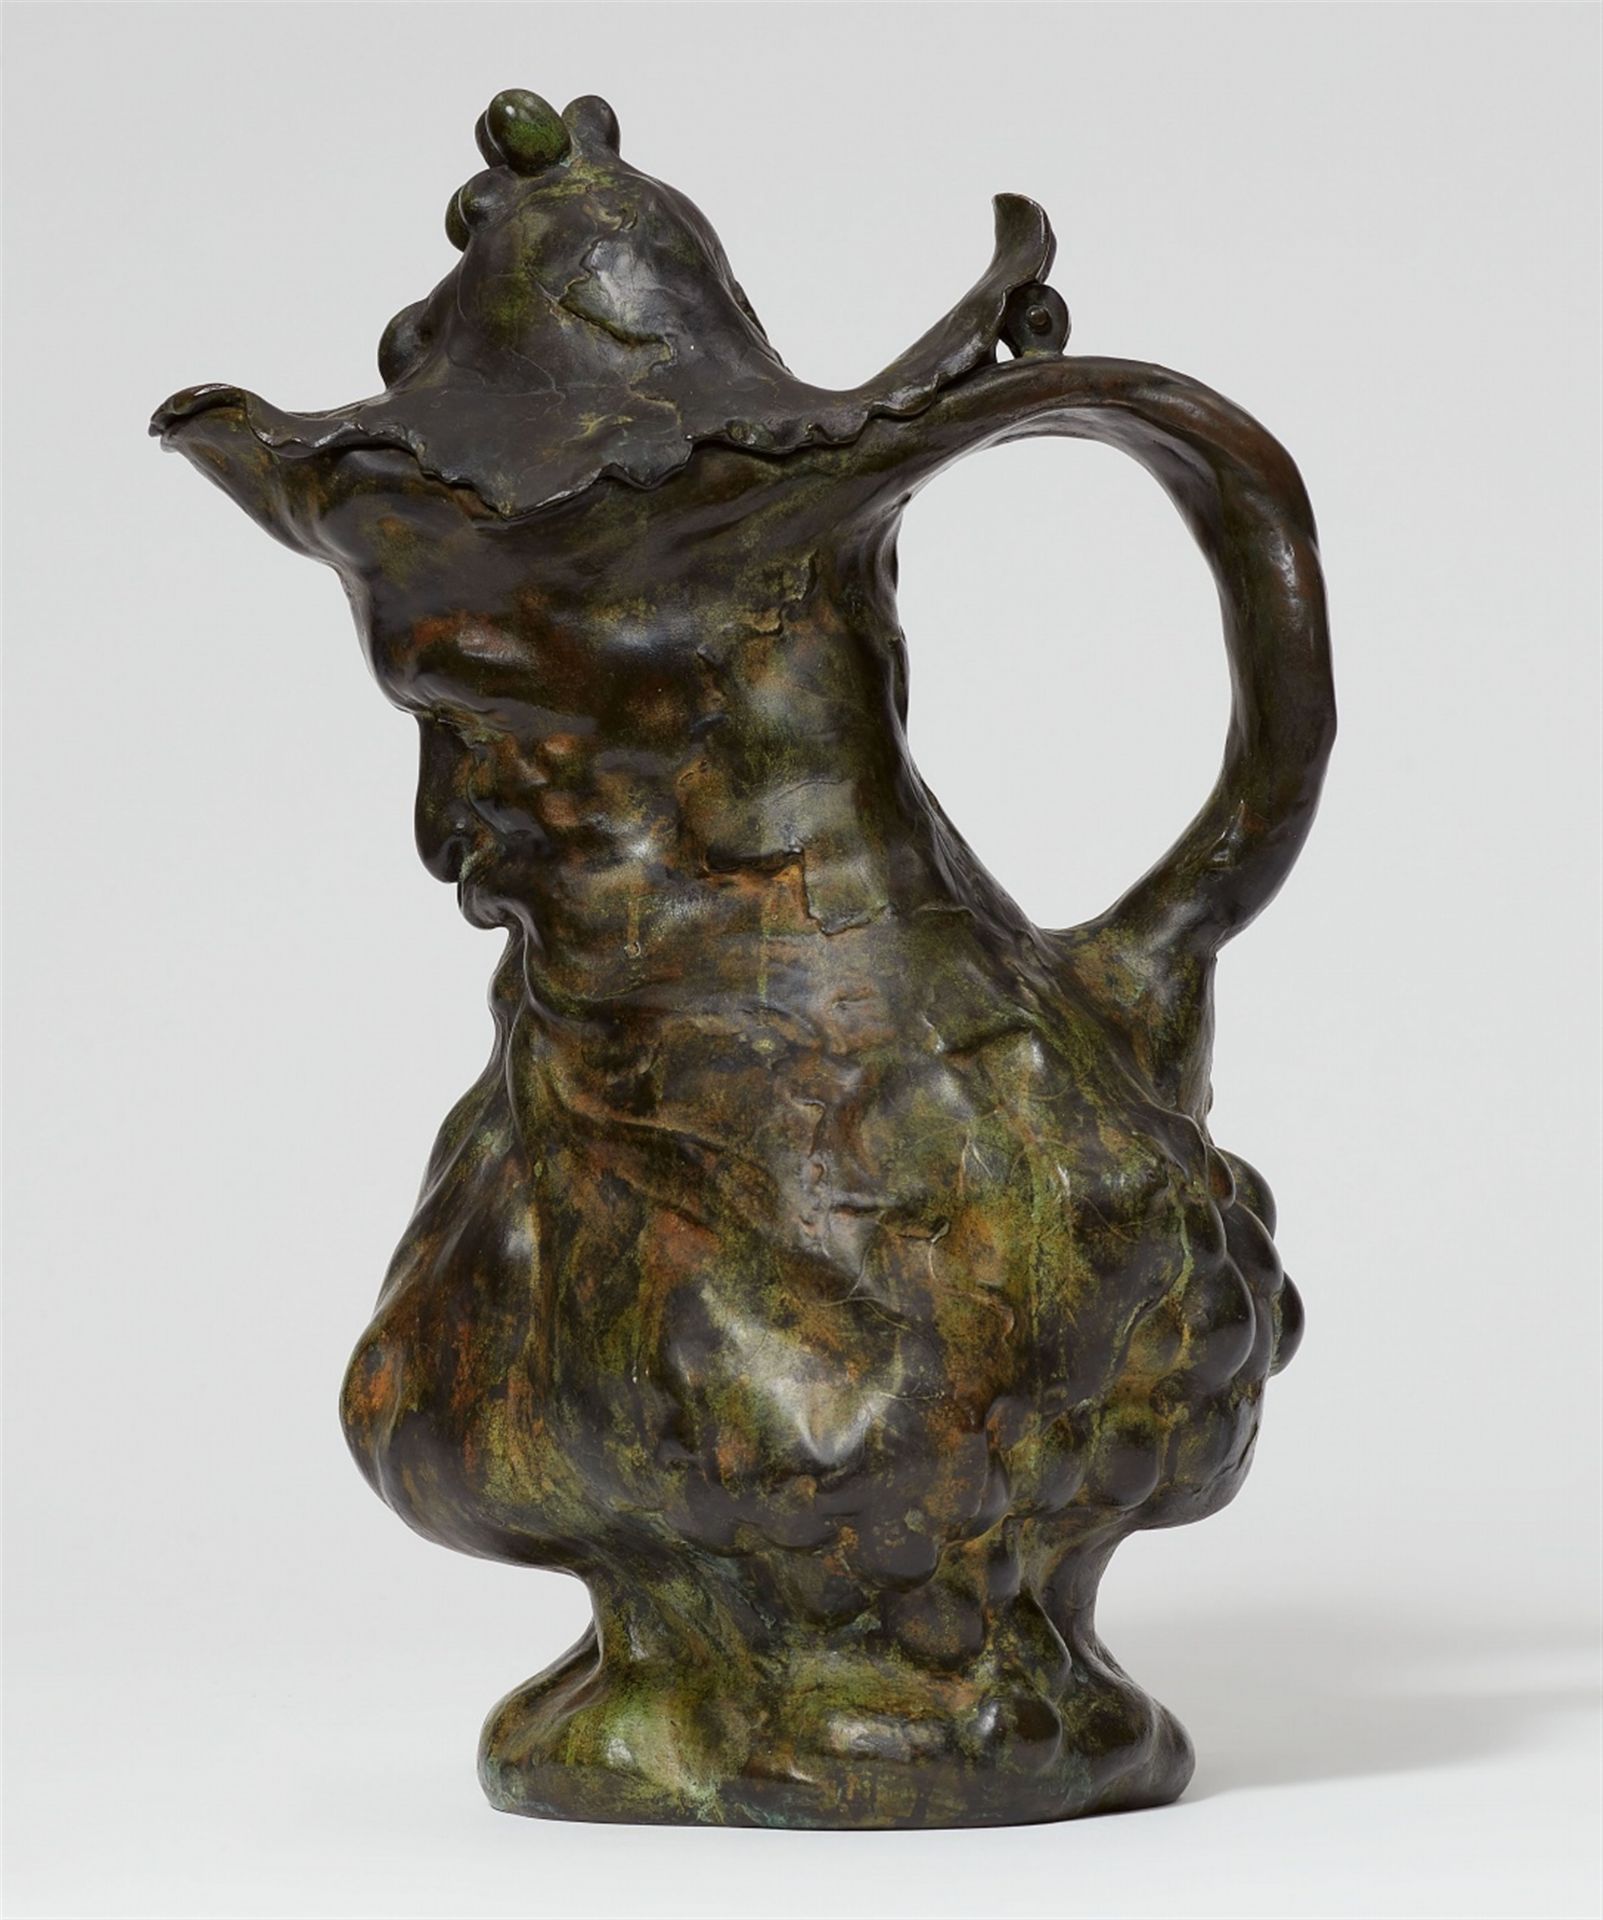 A bronze jug by Philippe Wolfers, “Le vin”